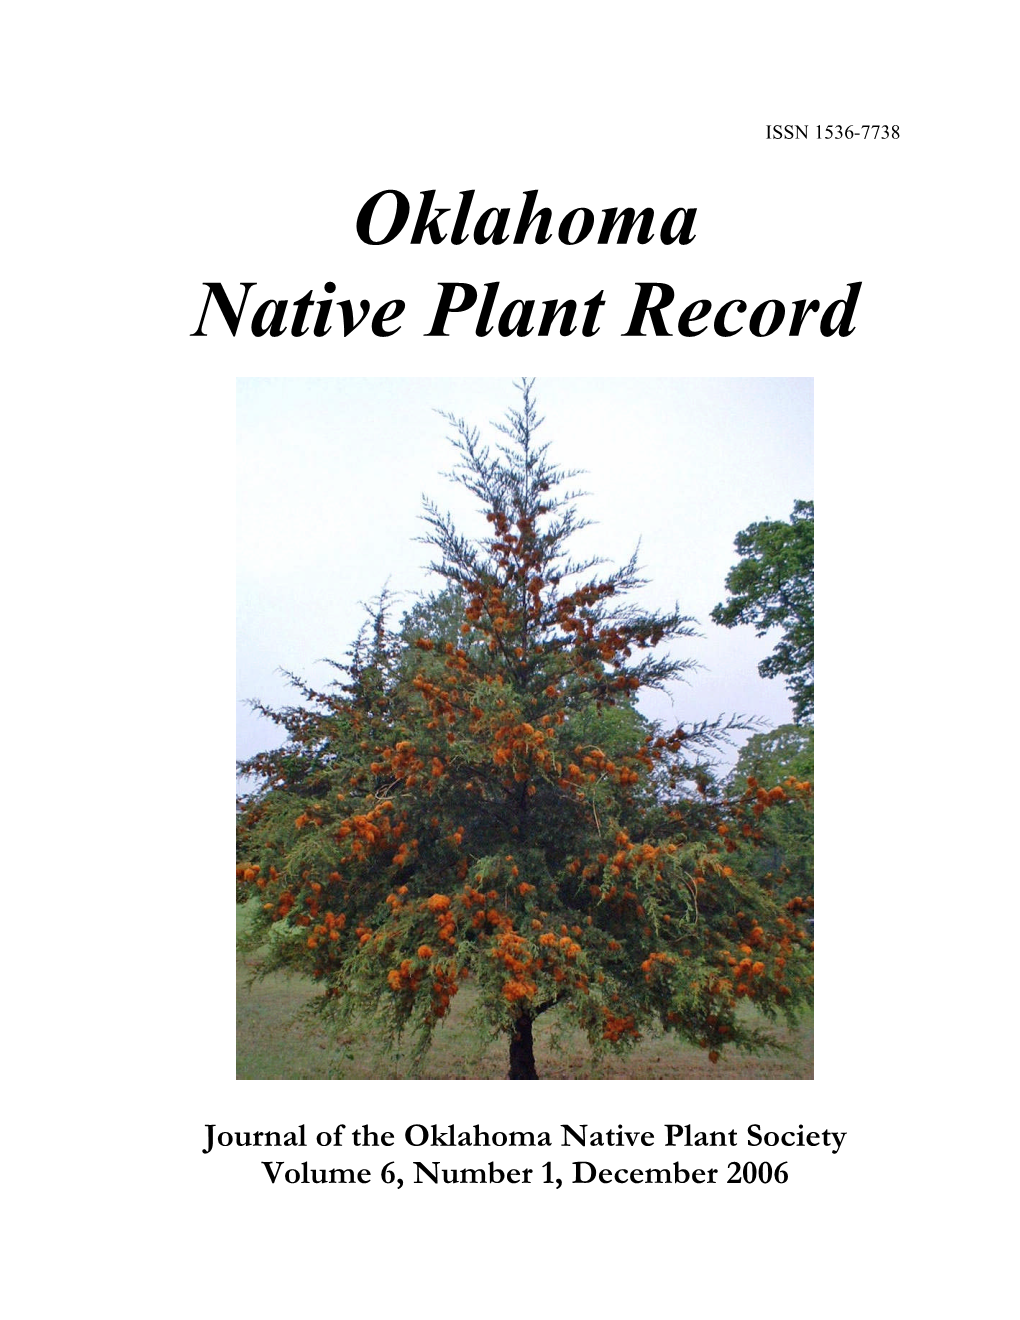 Journal of the Oklahoma Native Plant Society, Volume 6, Number 1